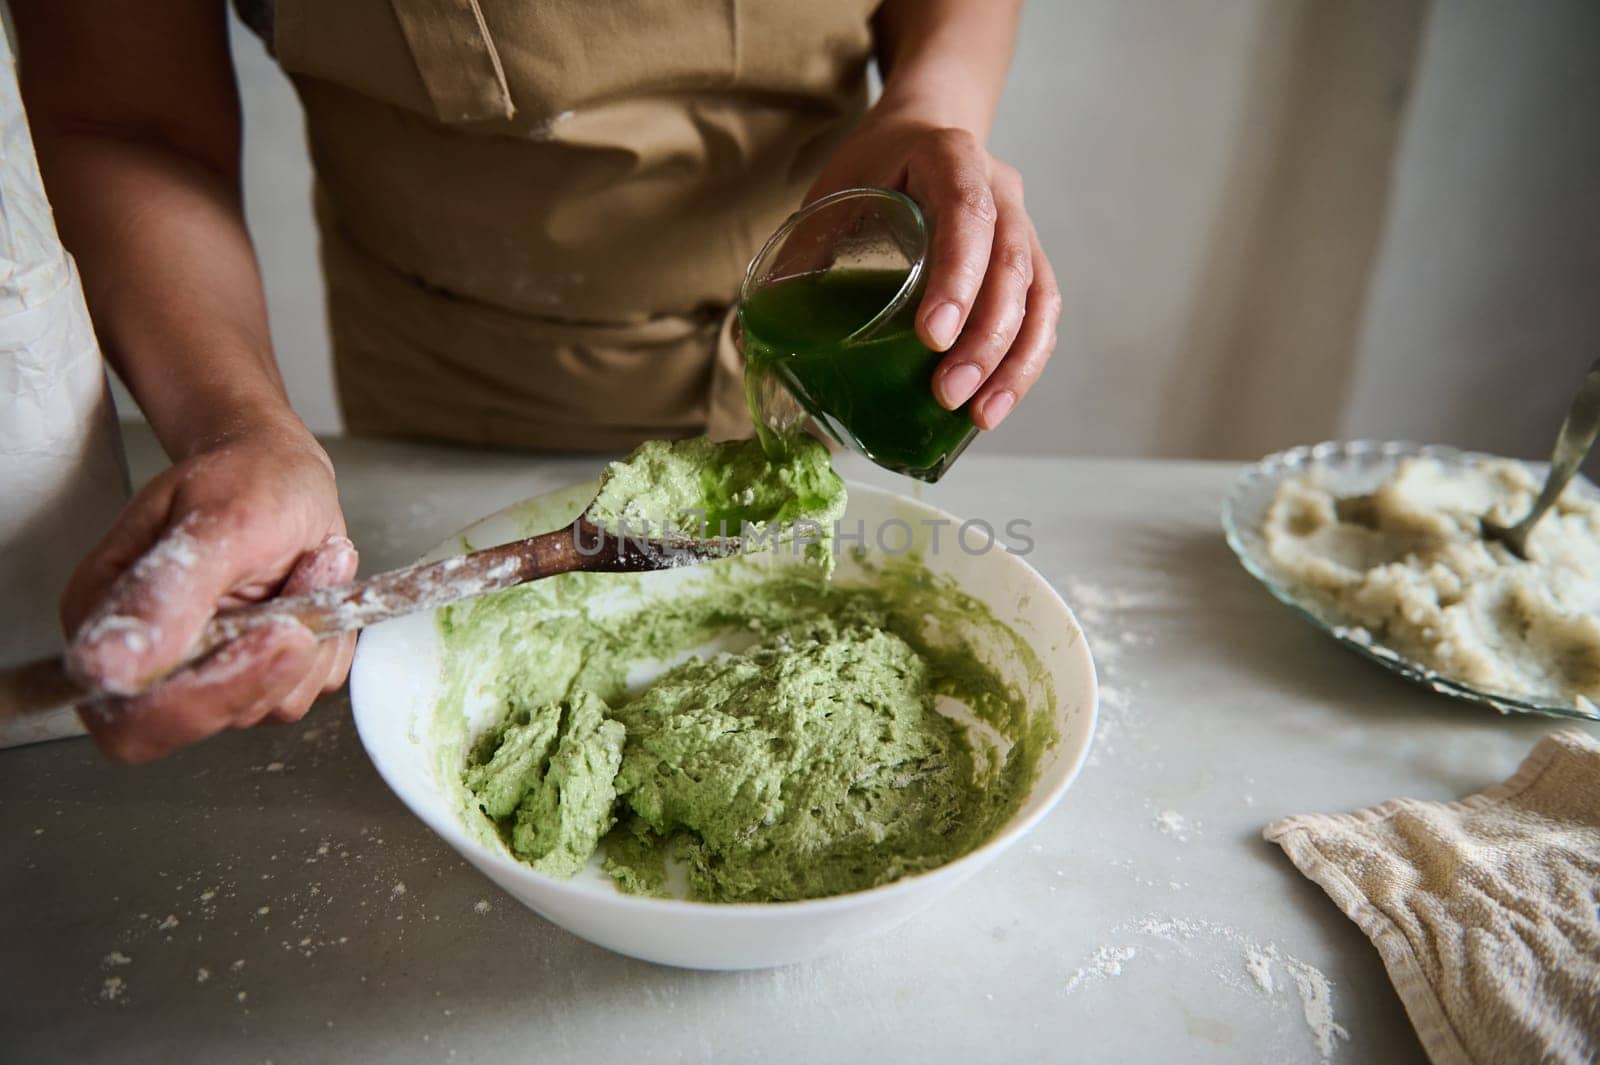 Close-up hands of a chef pastry, housewife pouring green spinach water into a bowl with wheat four, making dough of green color for ravioli or dumplings with mashed potato, in the rustic home kitchen